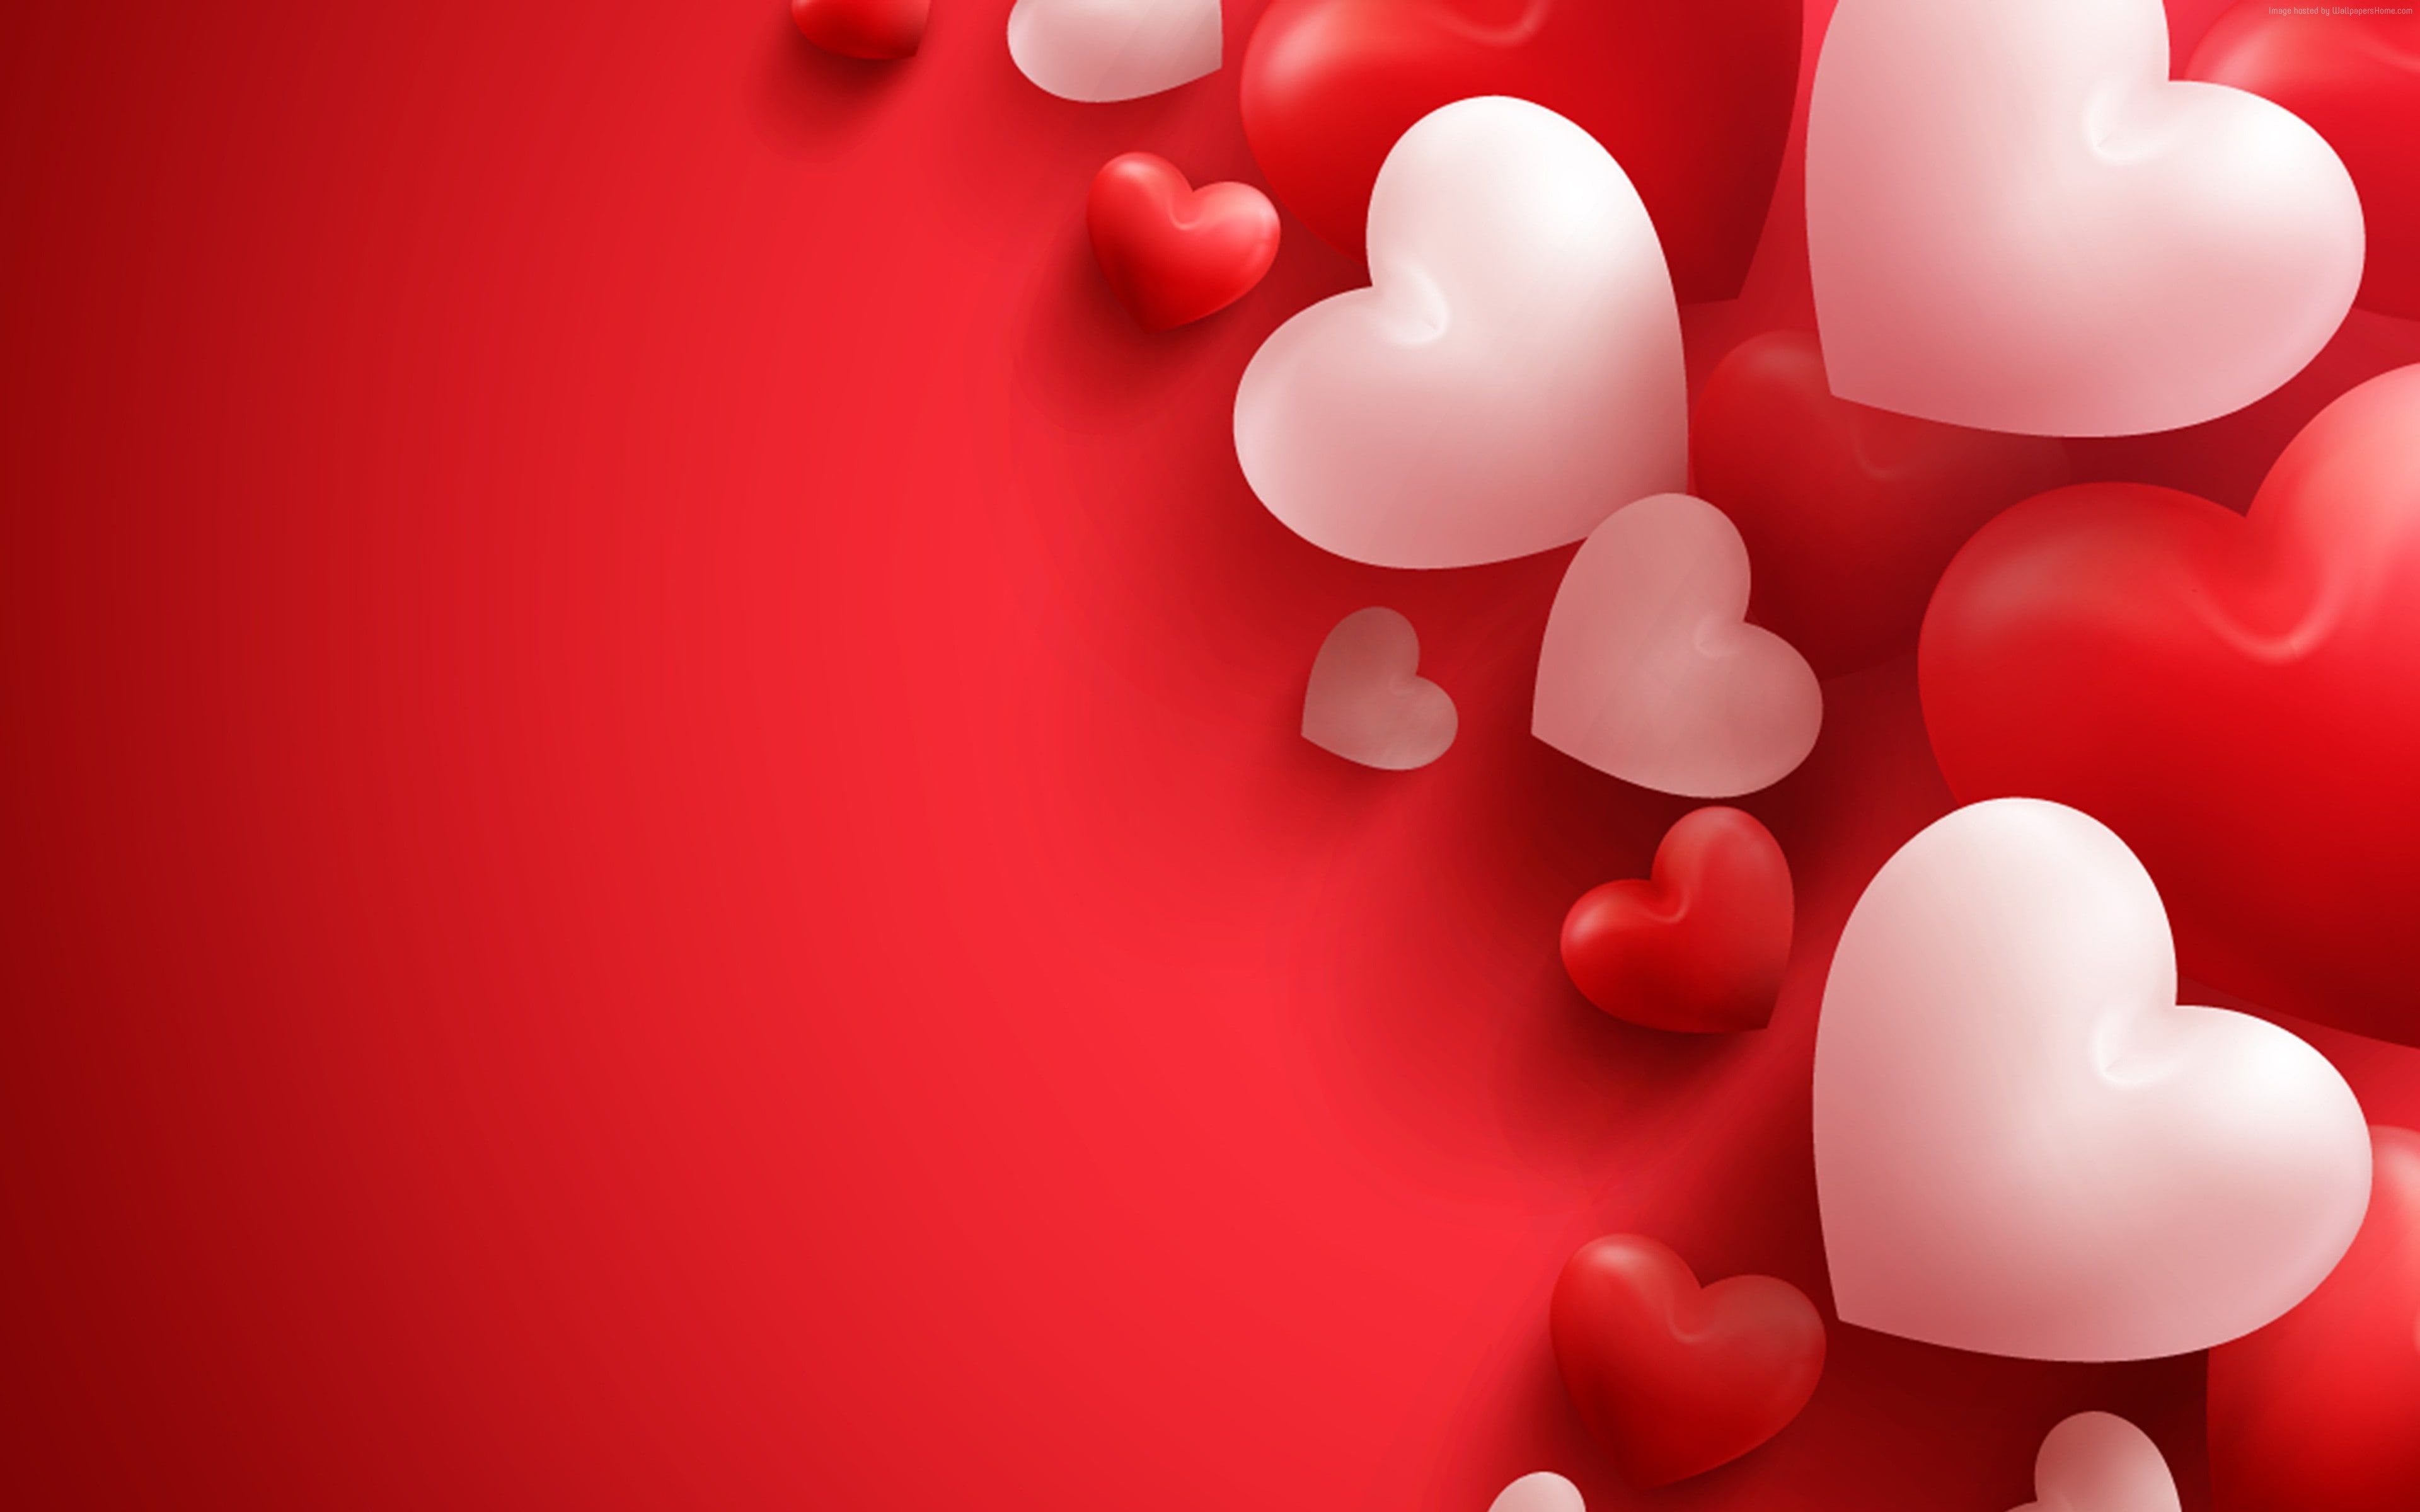 Red and white hearts floating on a red background - Valentine's Day